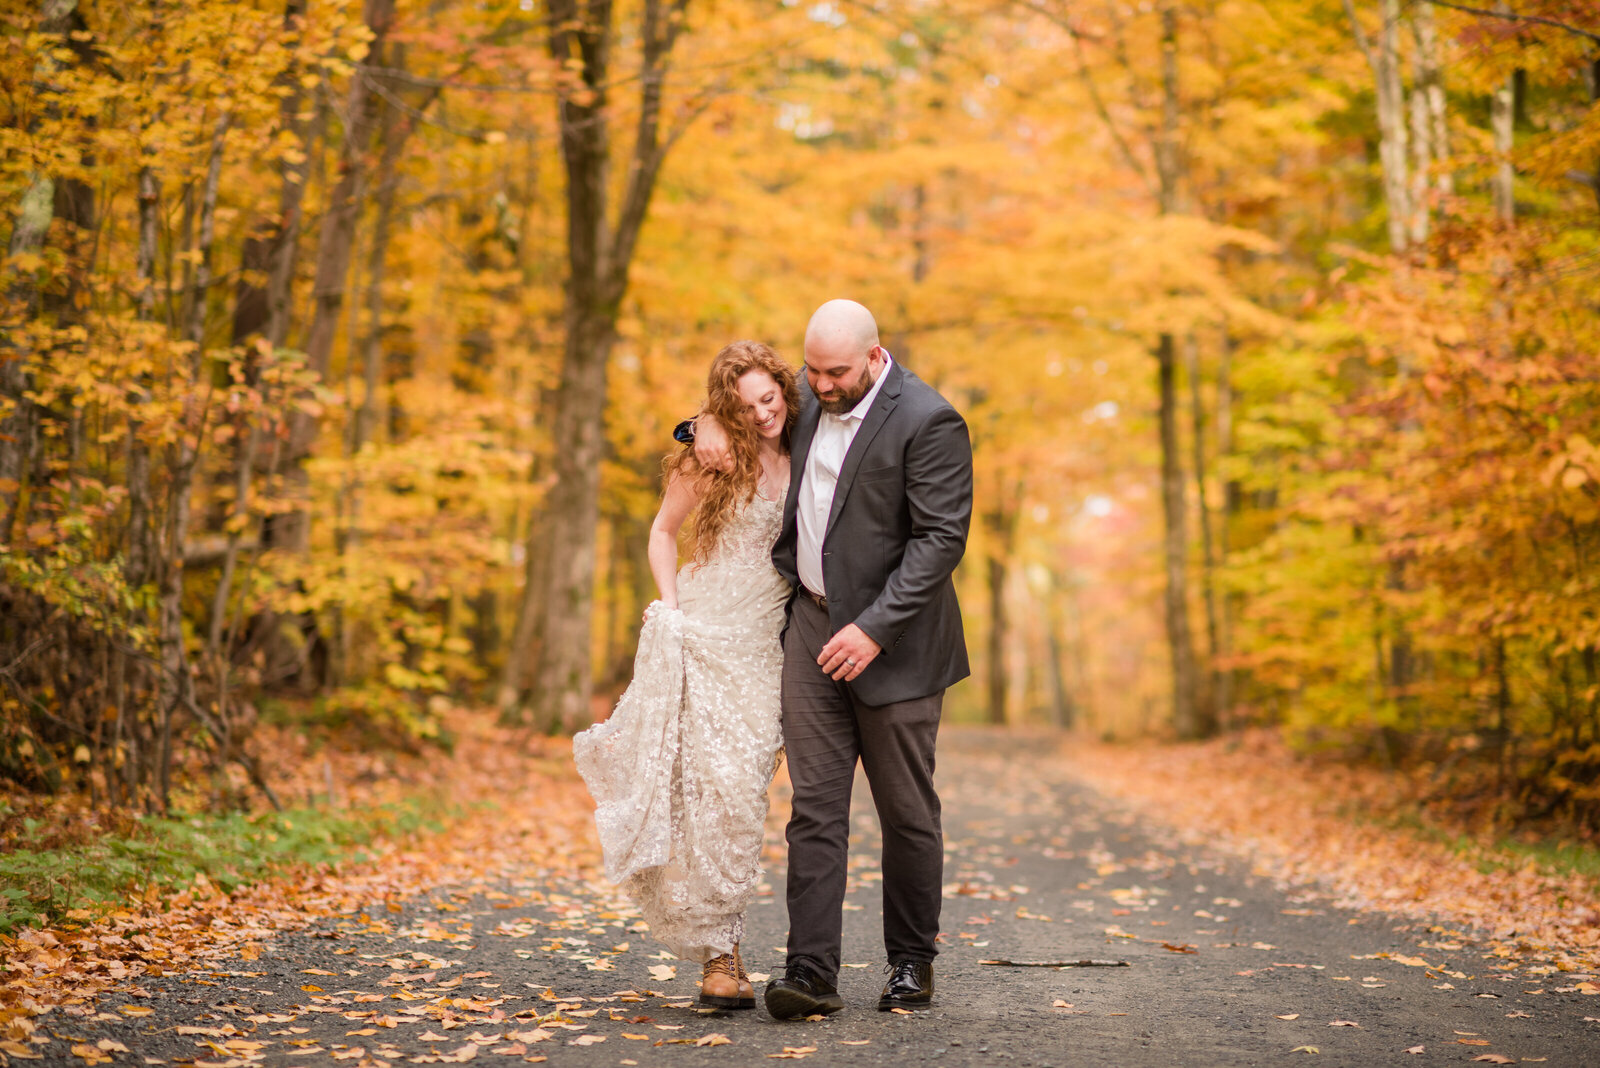 bride and her groom walking down a pathway with golden foliage toward their ceremony location.